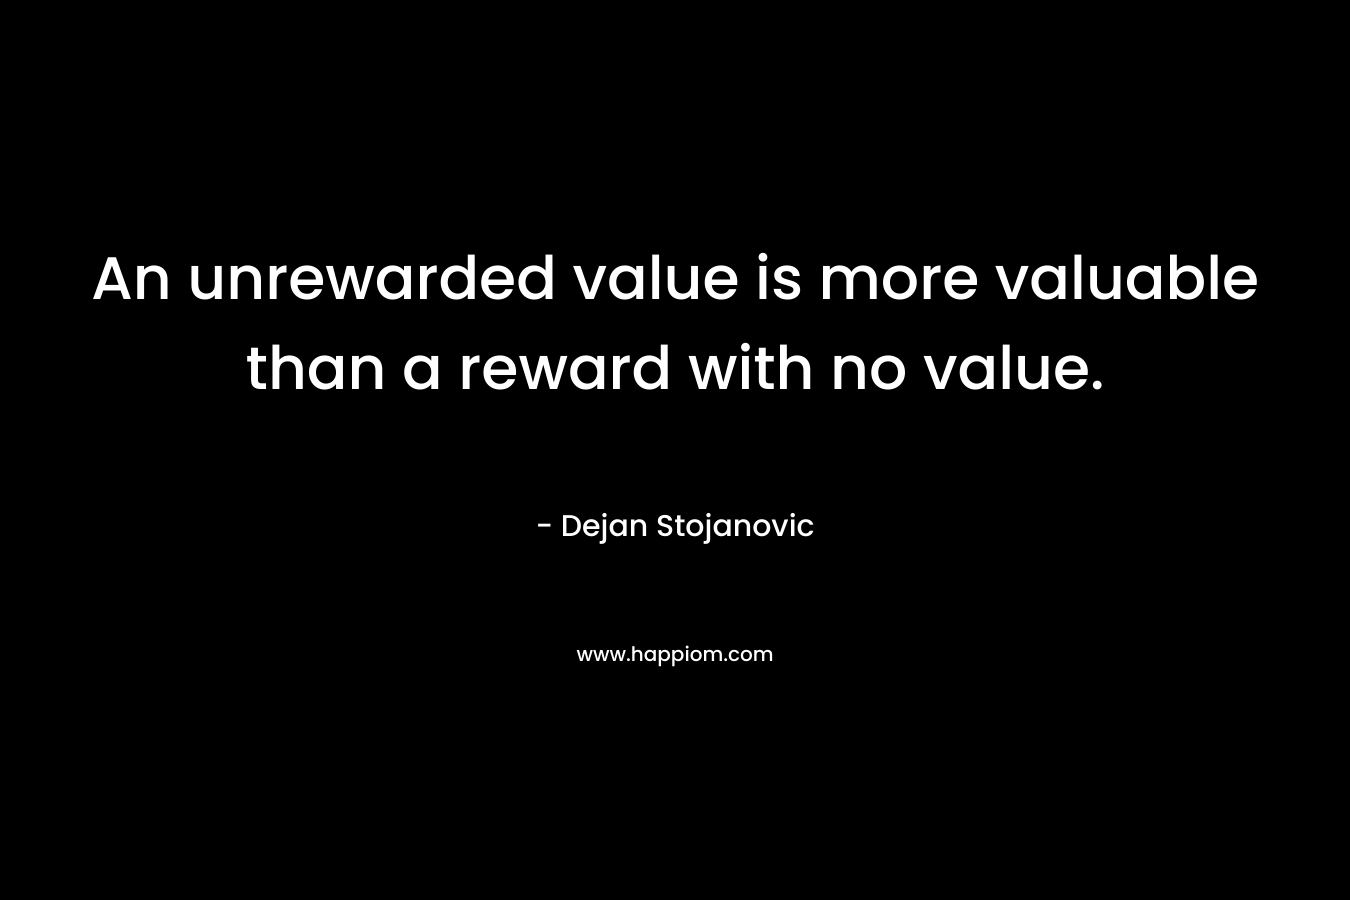 An unrewarded value is more valuable than a reward with no value.